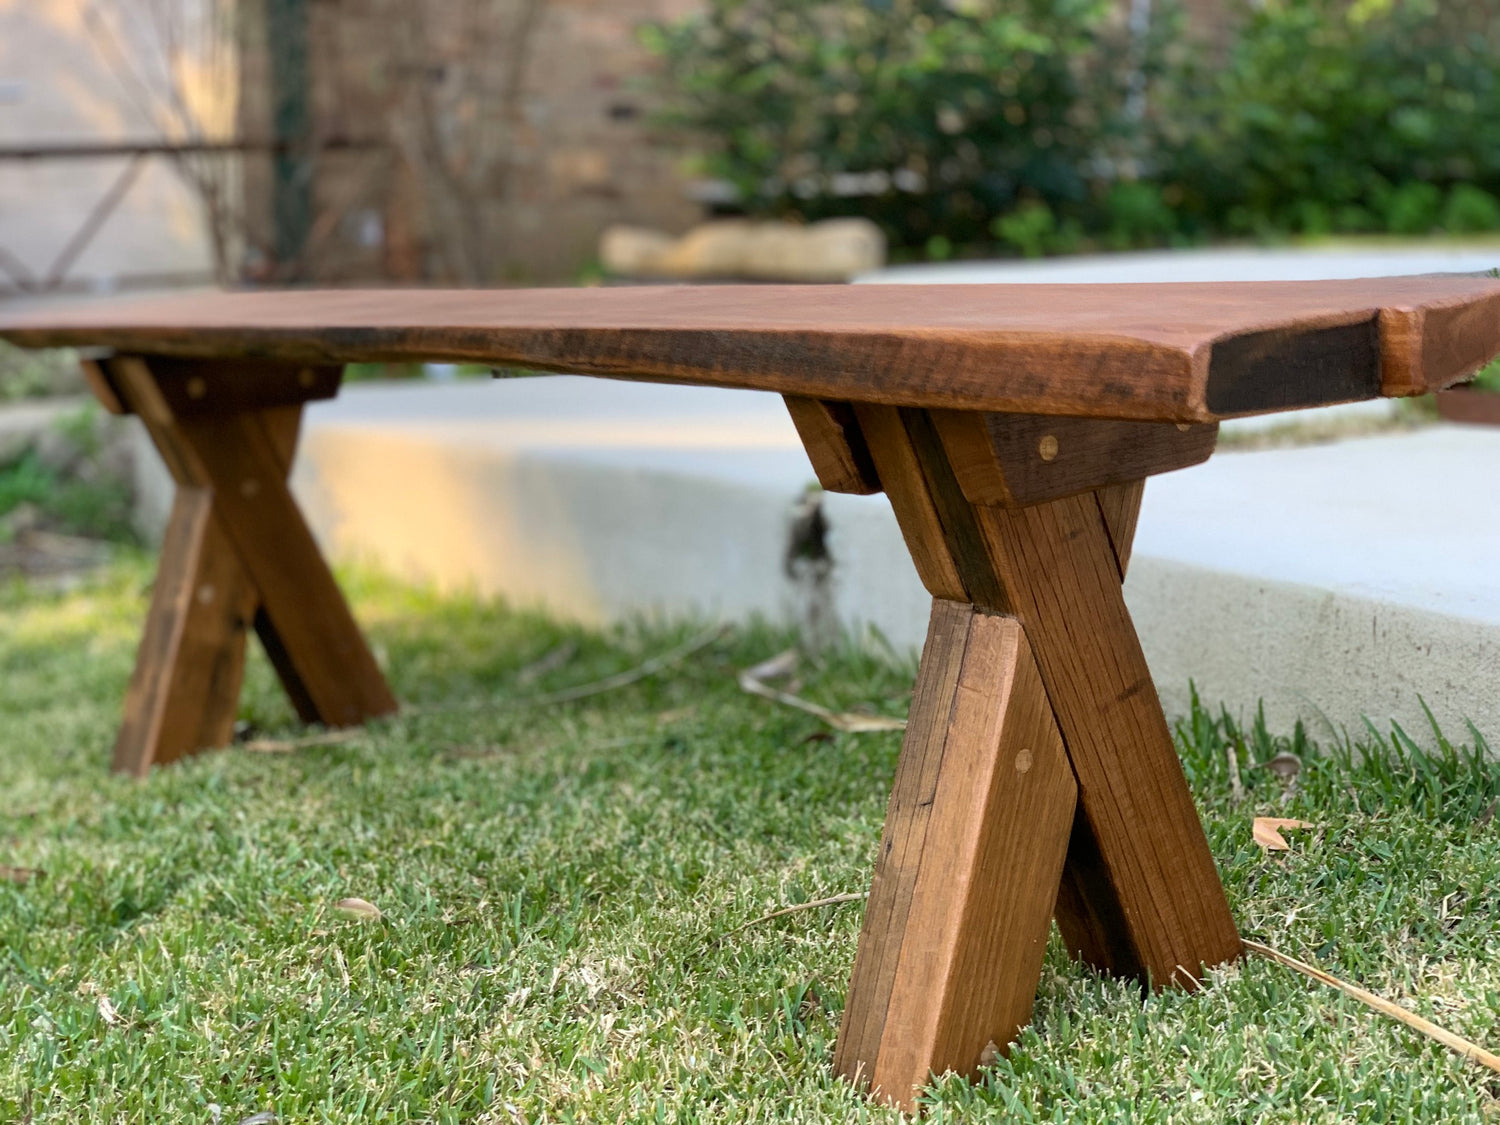 We're a furniture maker and designer who specialise in building tables. Here is a custom bench seat made out of 200 year old reclaimed Australian hardwood.